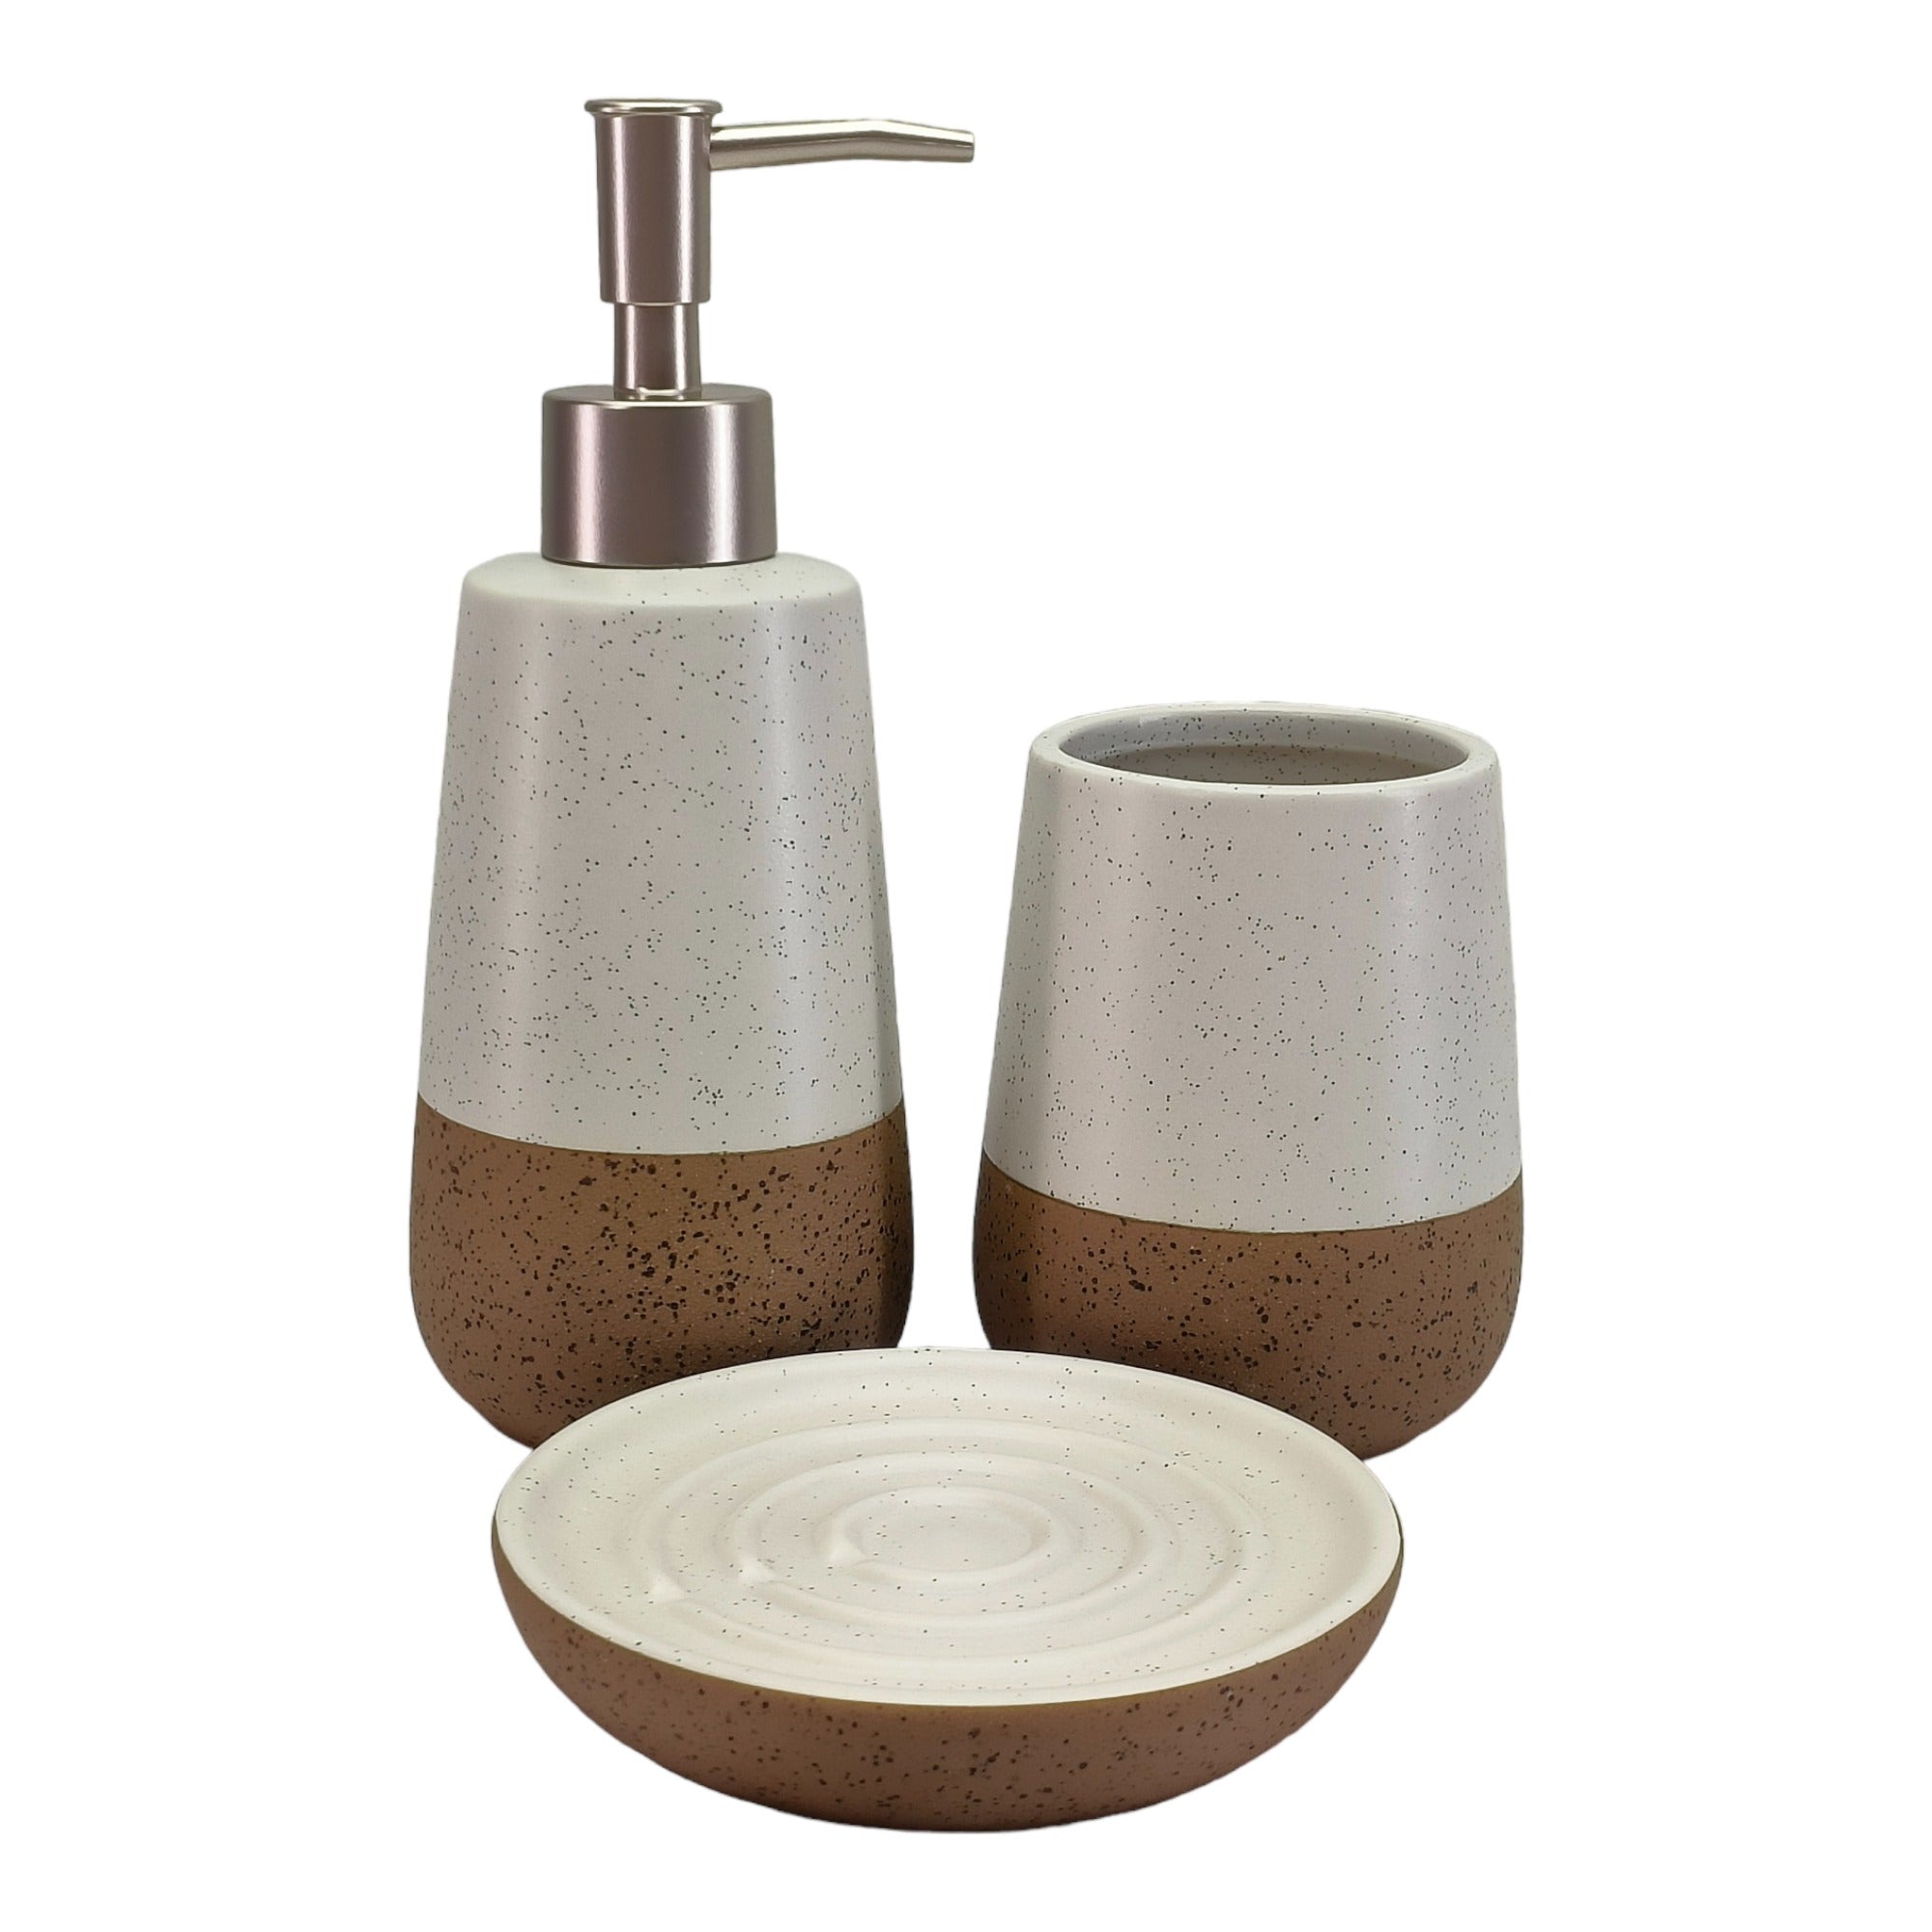 Ceramic Soap Dispenser Set with Toothbrush Holder and Soap Dish, Set of 3 Bathroom Accessories for Home (C3119)